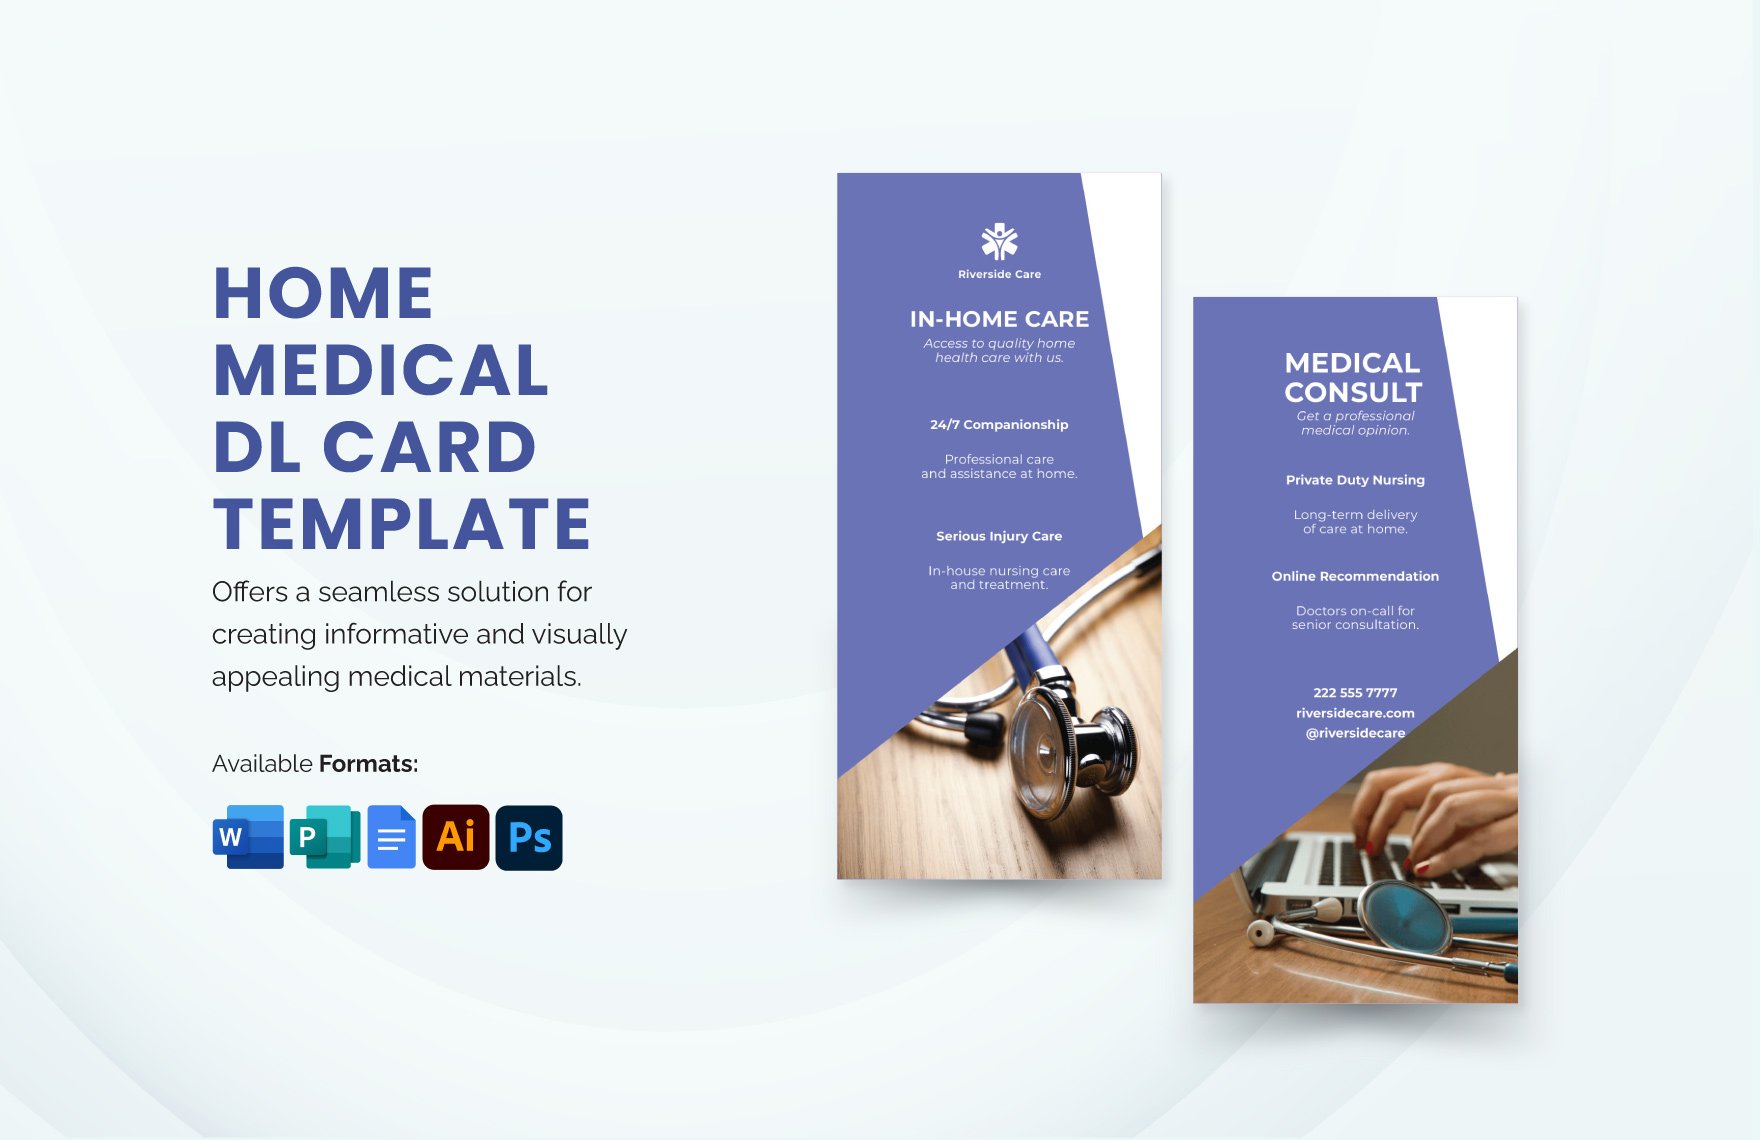 Home Medical DL Card Template